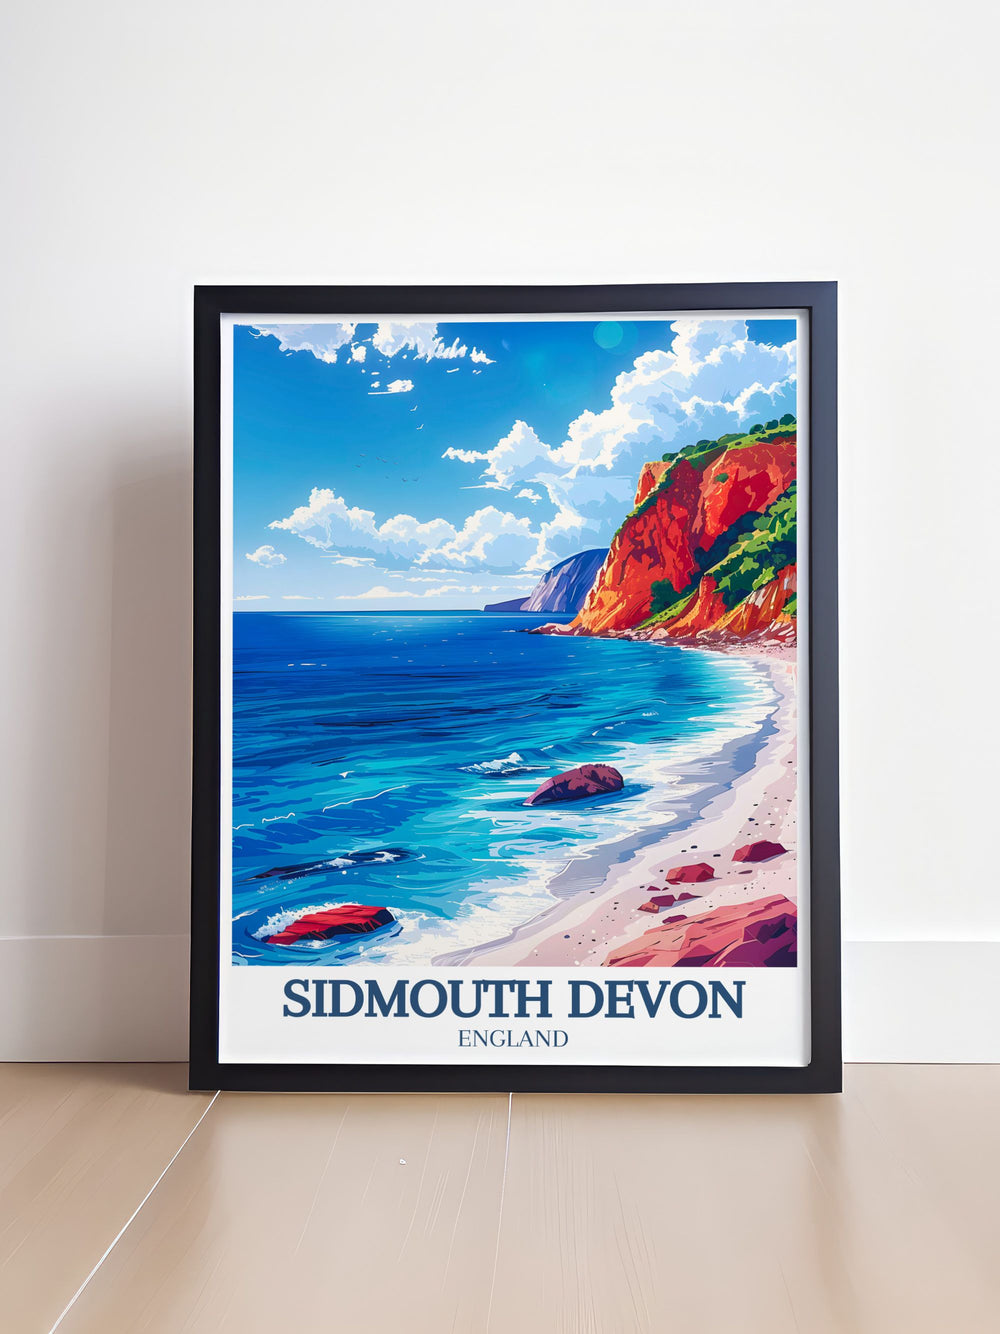 Featuring the vibrant scenery of Sidmouth Beach and the Jurassic Cliffs, this travel poster is perfect for those who love exploring coastal destinations and appreciating the beauty of nature.